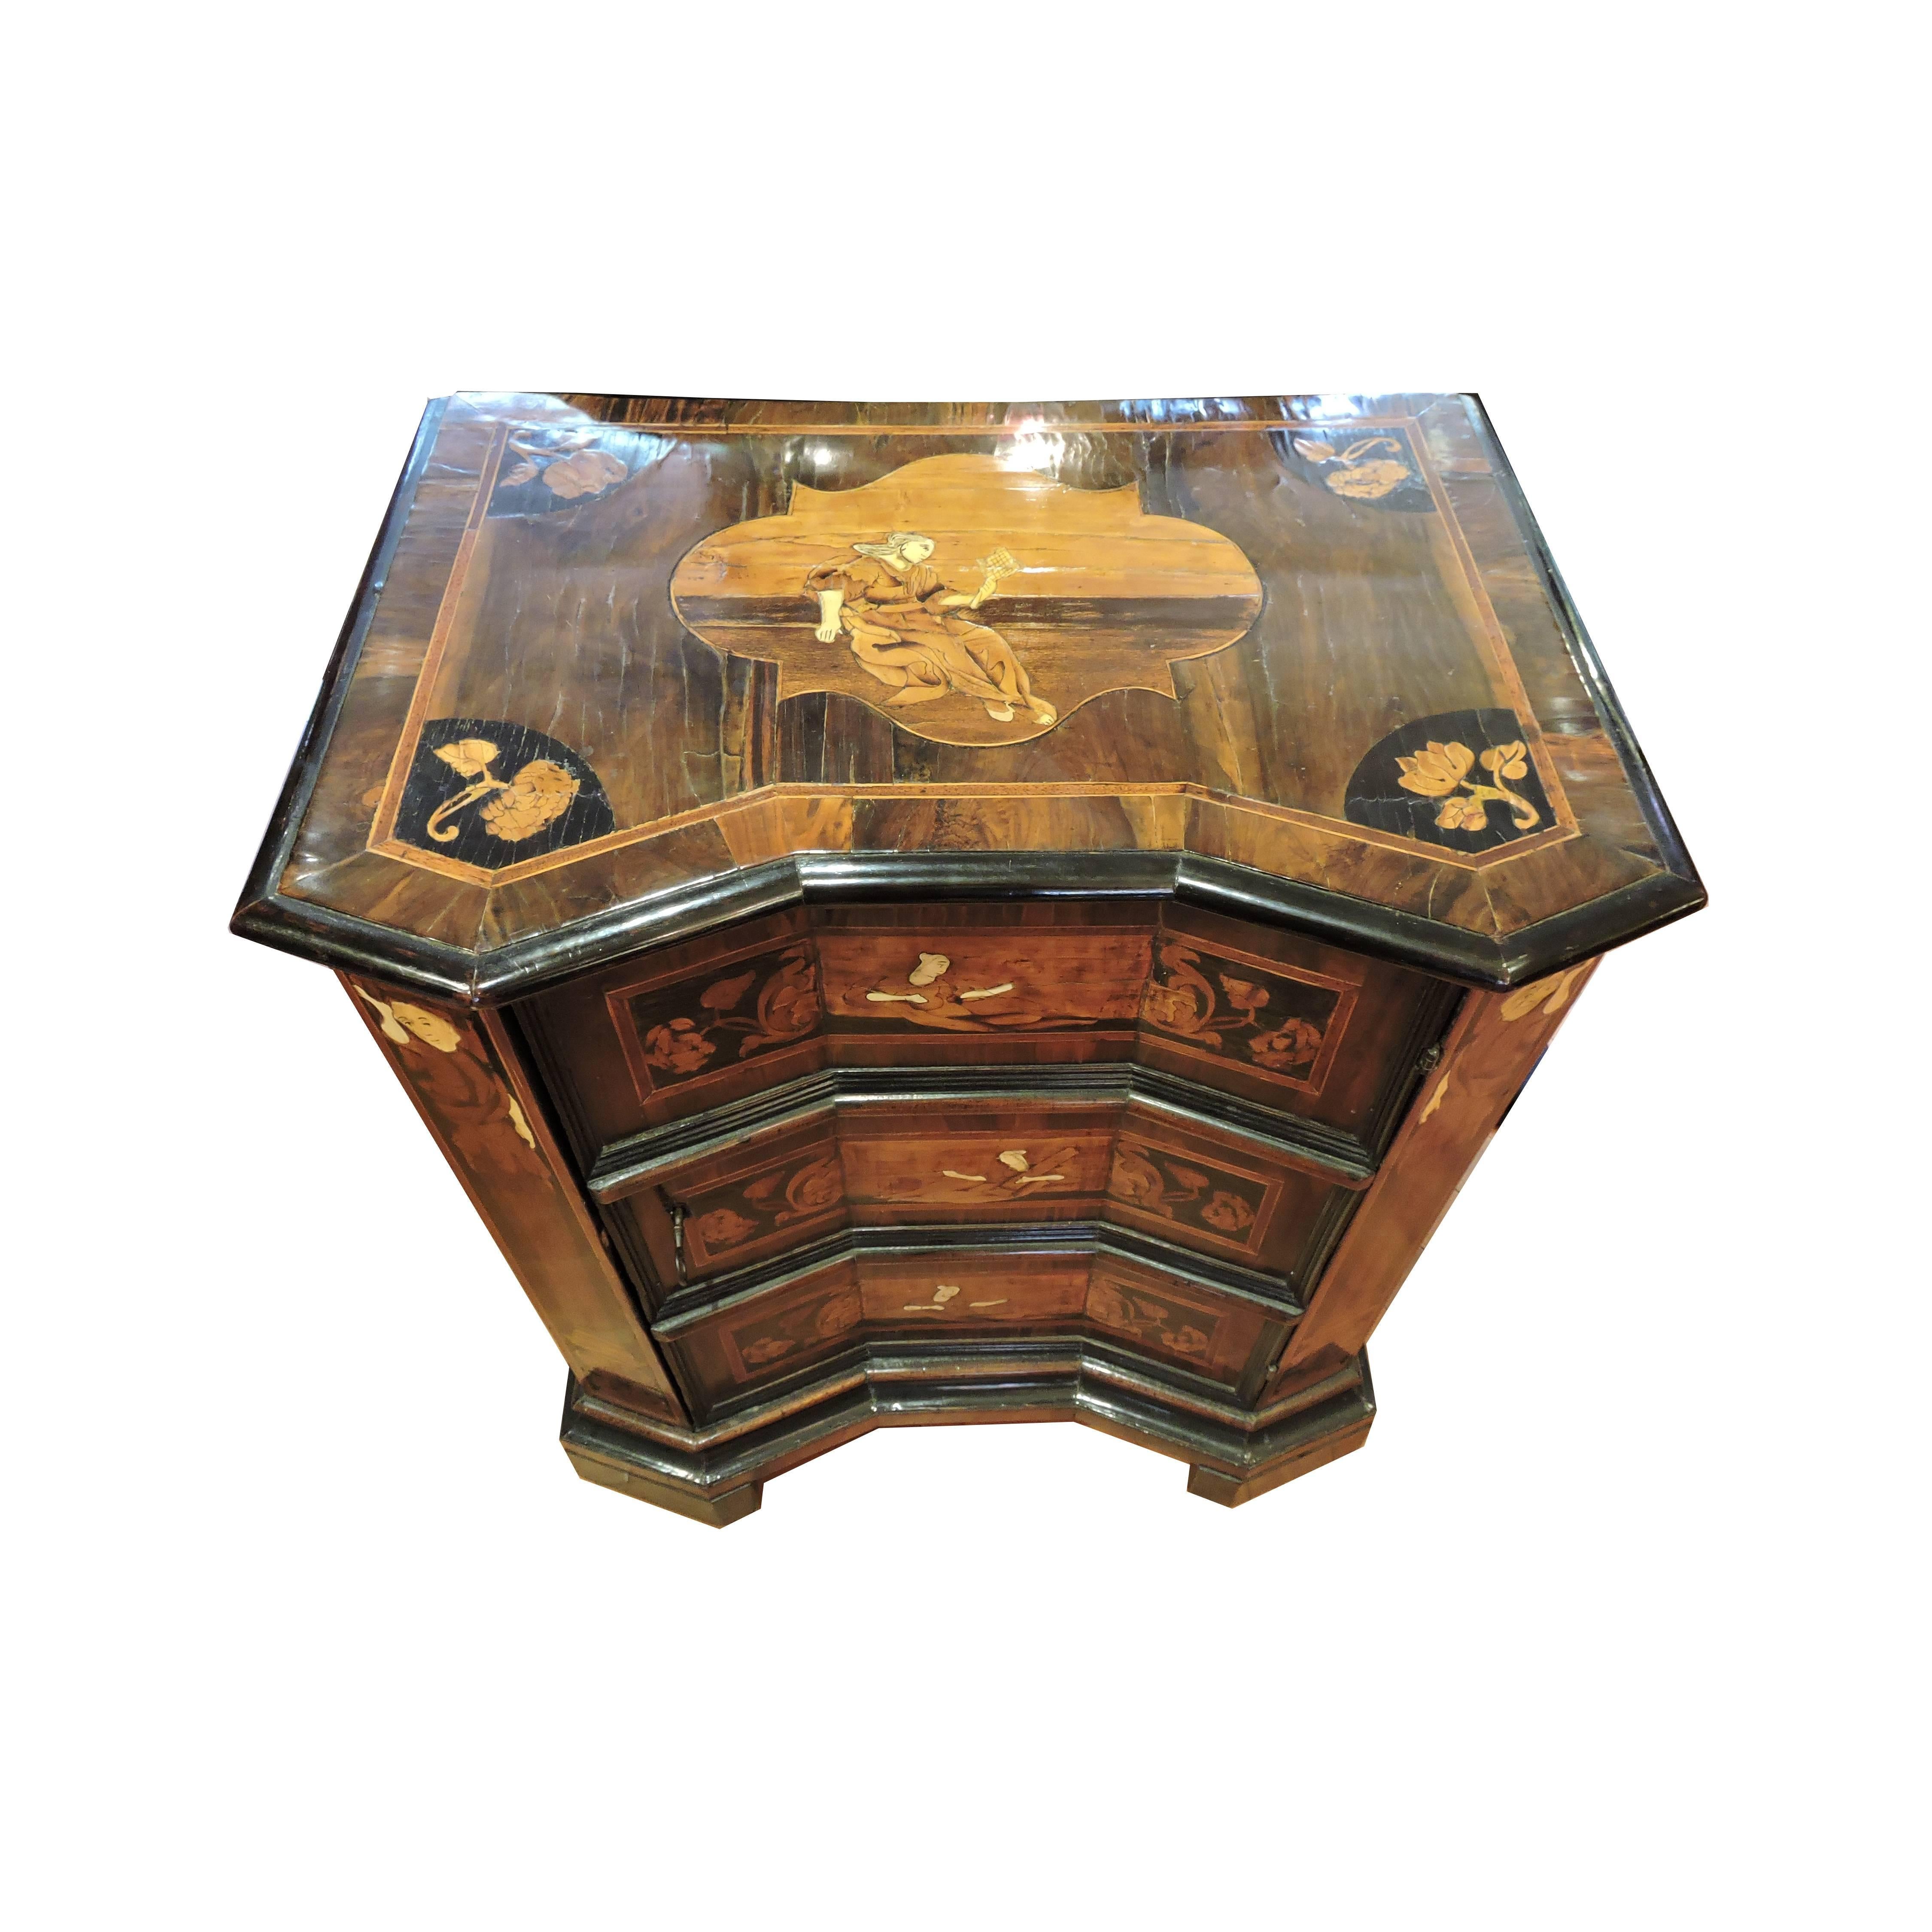 An Italian beautifully inlaid mid-18th century commode / cabinet having one door opening that is in the shape of a three-drawer commode. The walnut has wonderful grain and is bordered by black ebony. The piece is also inlaid throughout with fruit